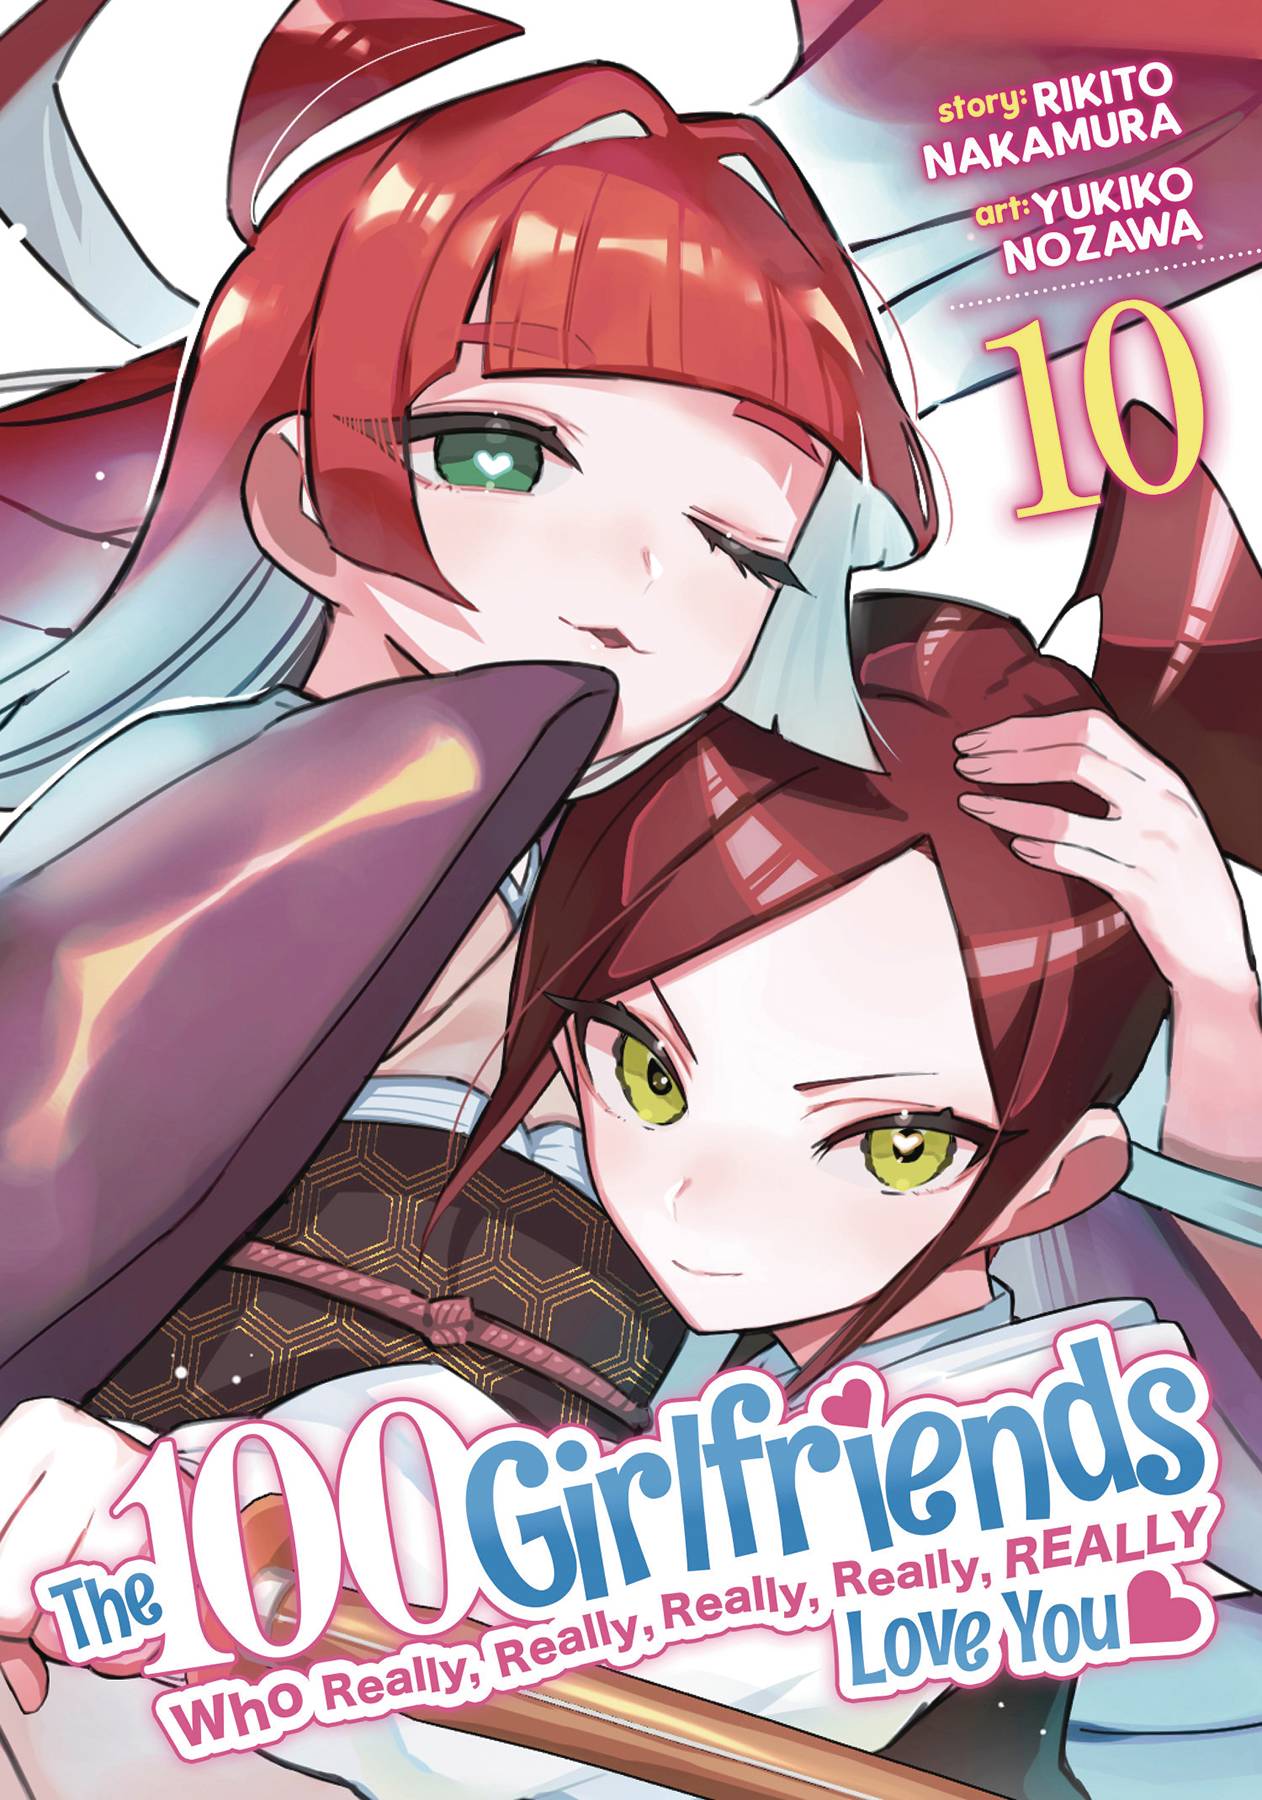 100 Girlfriends Who Really Love You Gn Vol 10 (Mr) (C: 0-1-2